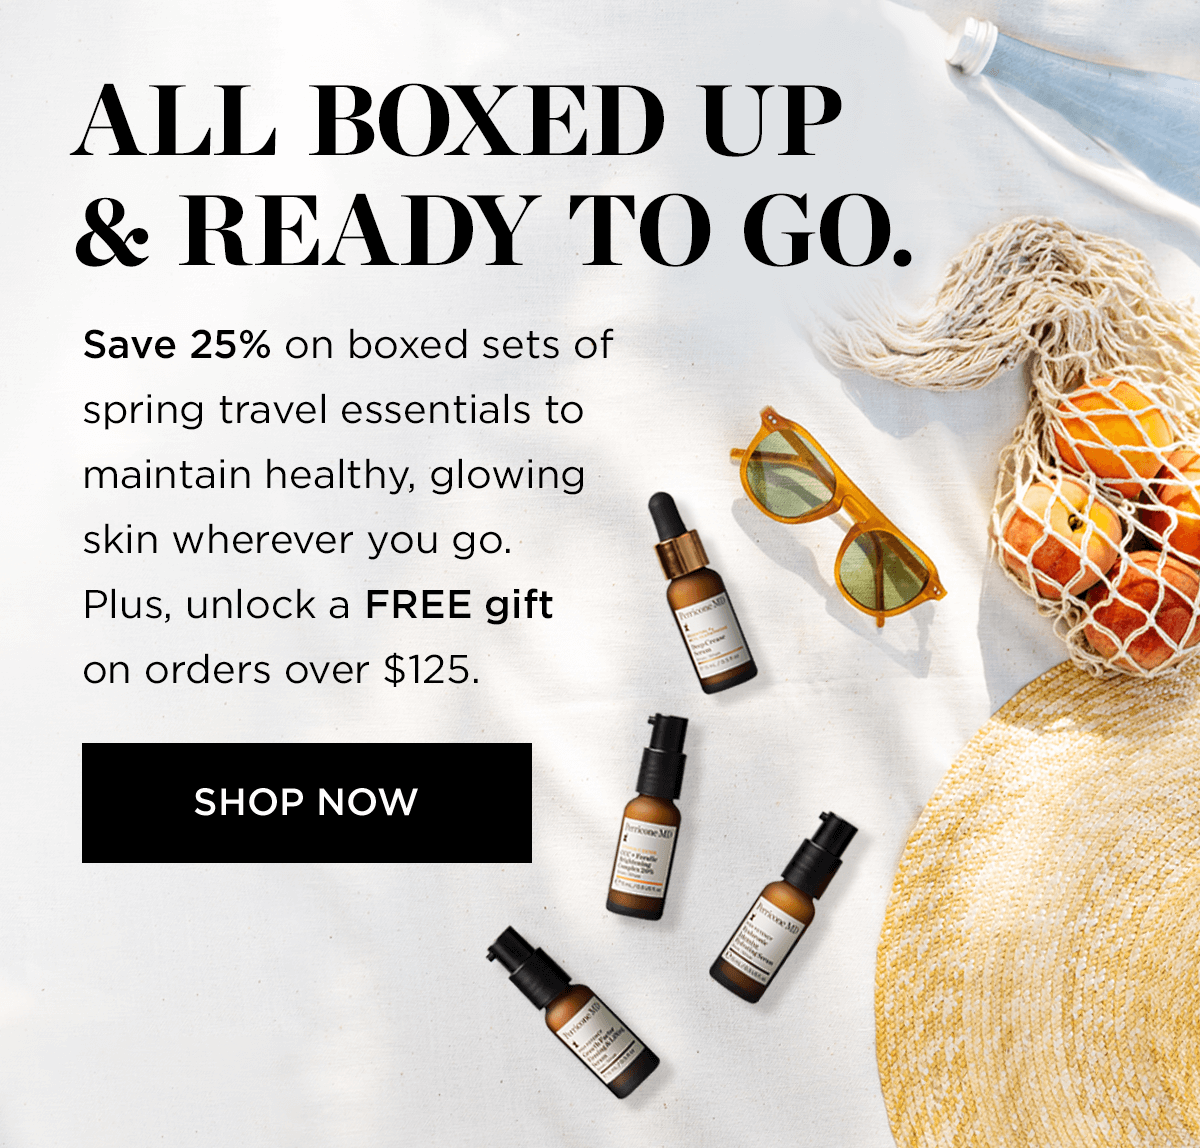 ALL BOXED UP READY TO GO. Save 25% on boxed sets of spring travel essentials to maintain healthy, glowing skin wherever you go. Plus, unlock a FREE gift on orders over $125. SHOP NOW g 